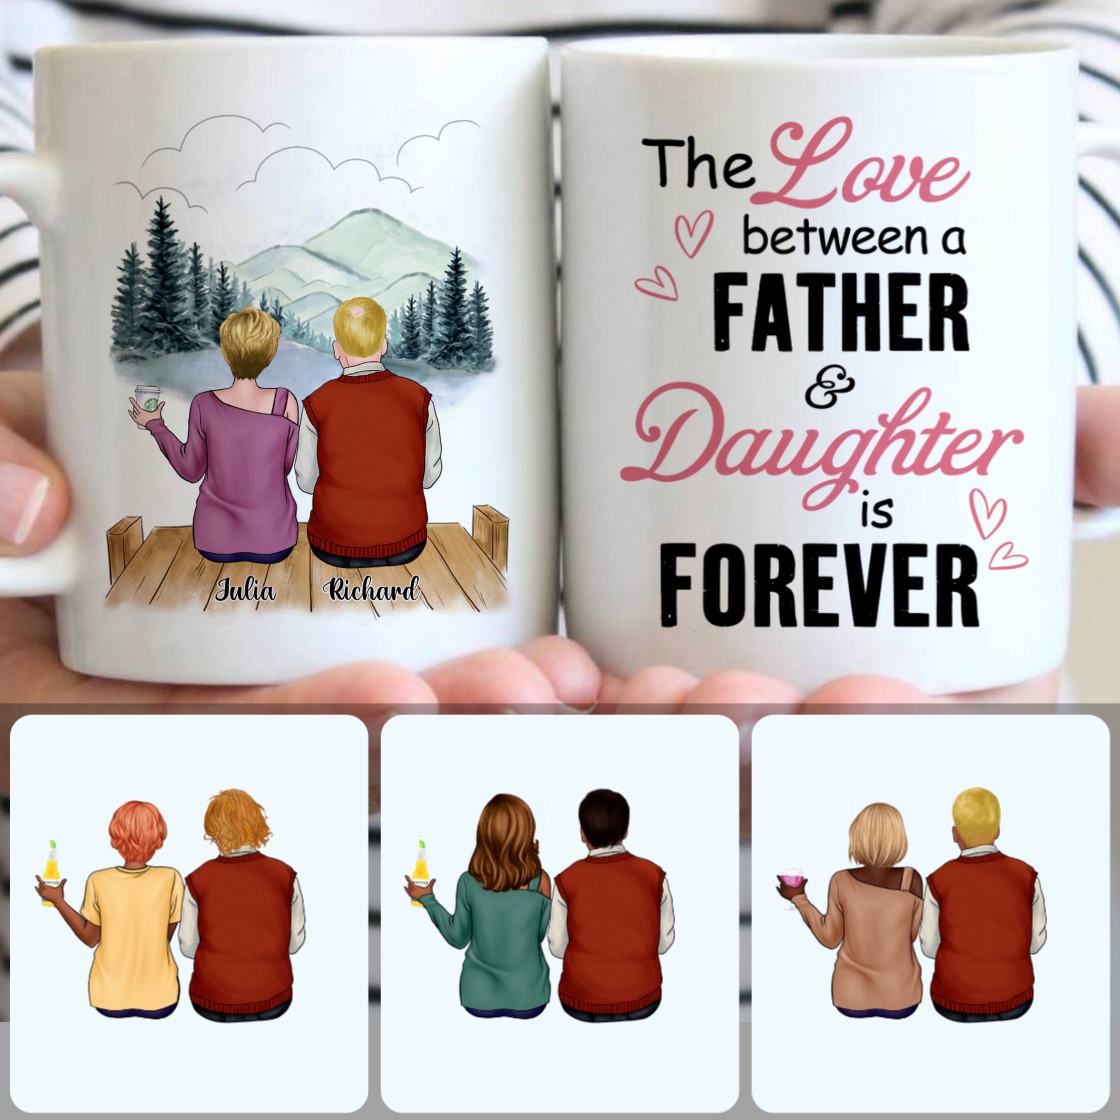 Personalized Mug, Special Father's Day Gifts, Father & Daughter Customized Coffee Mug With Names